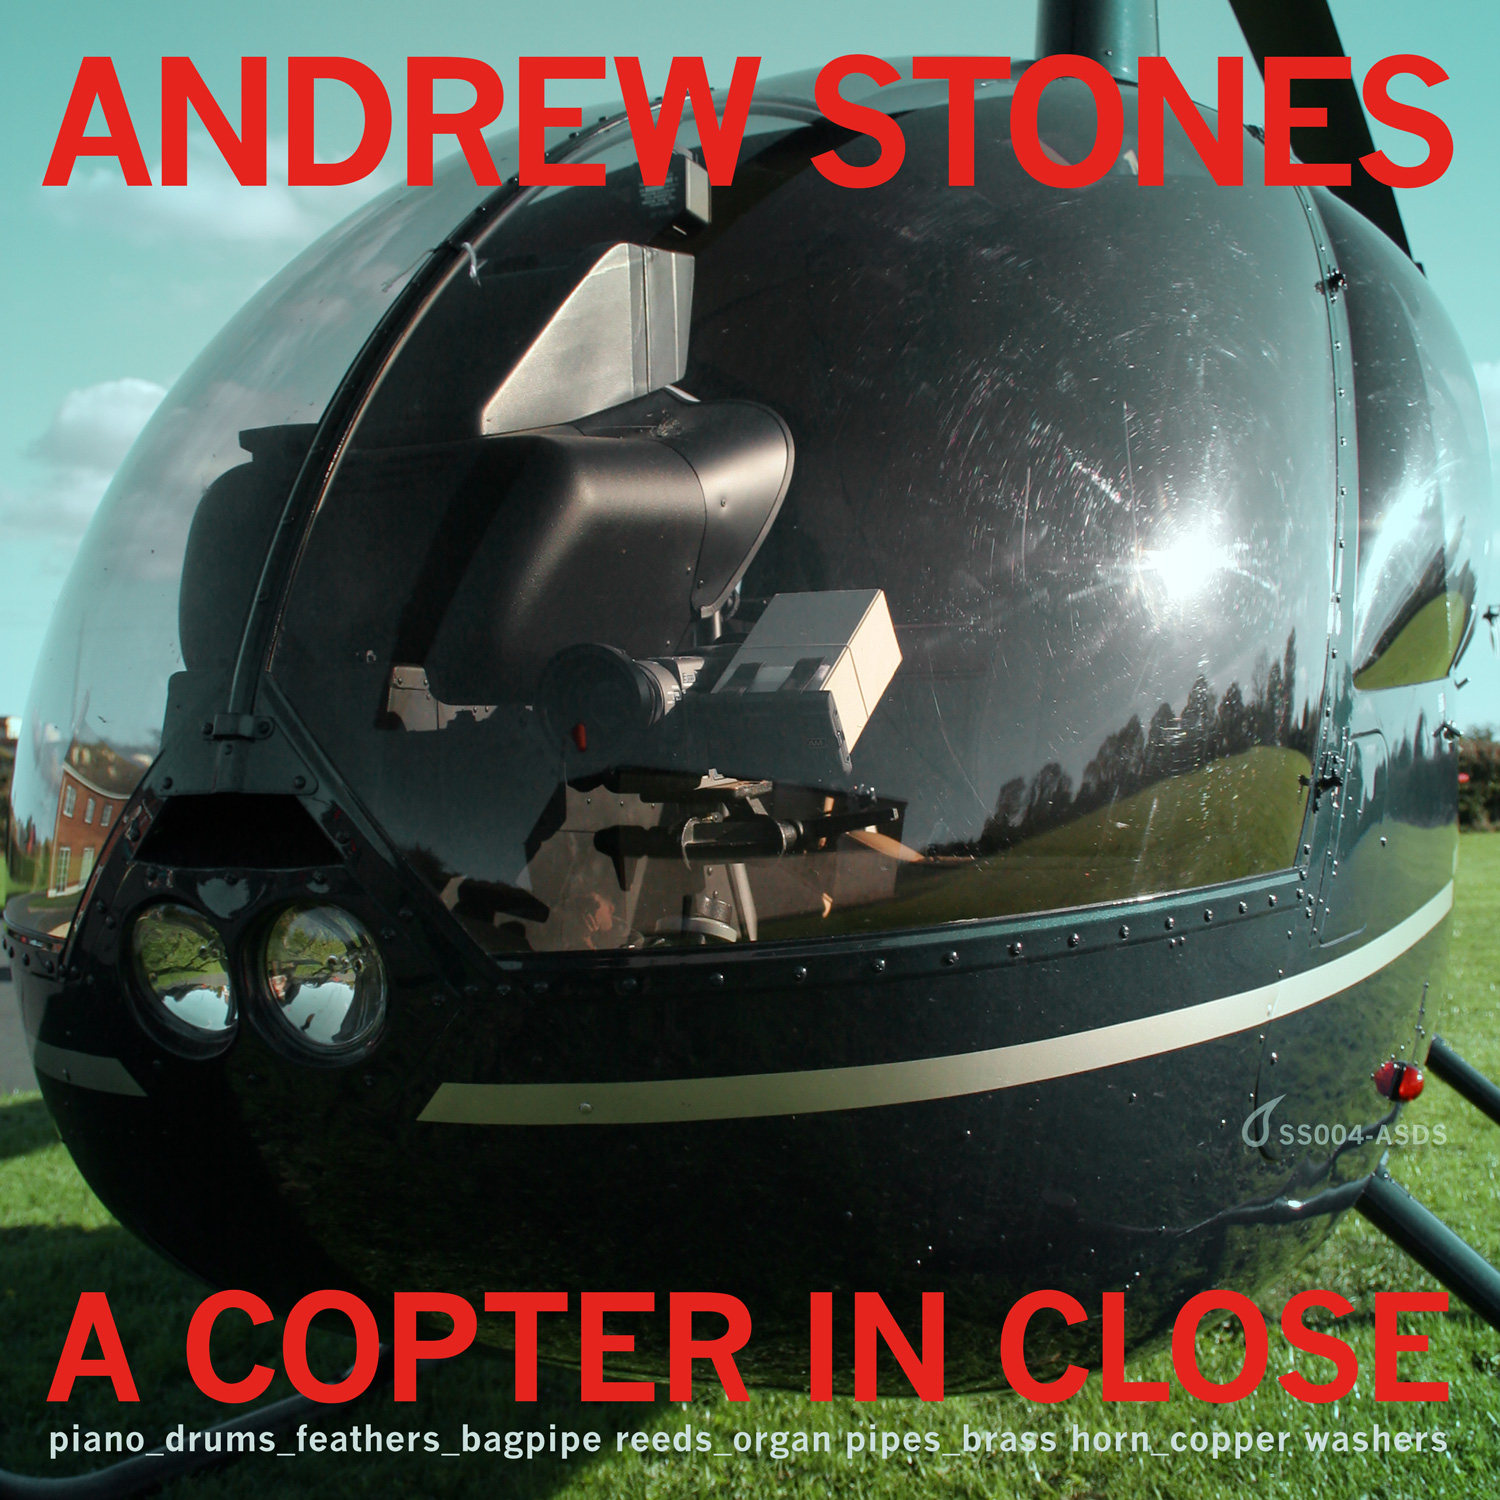 Andrew Stones - A Copter In Close. Digital single cover art 2020.